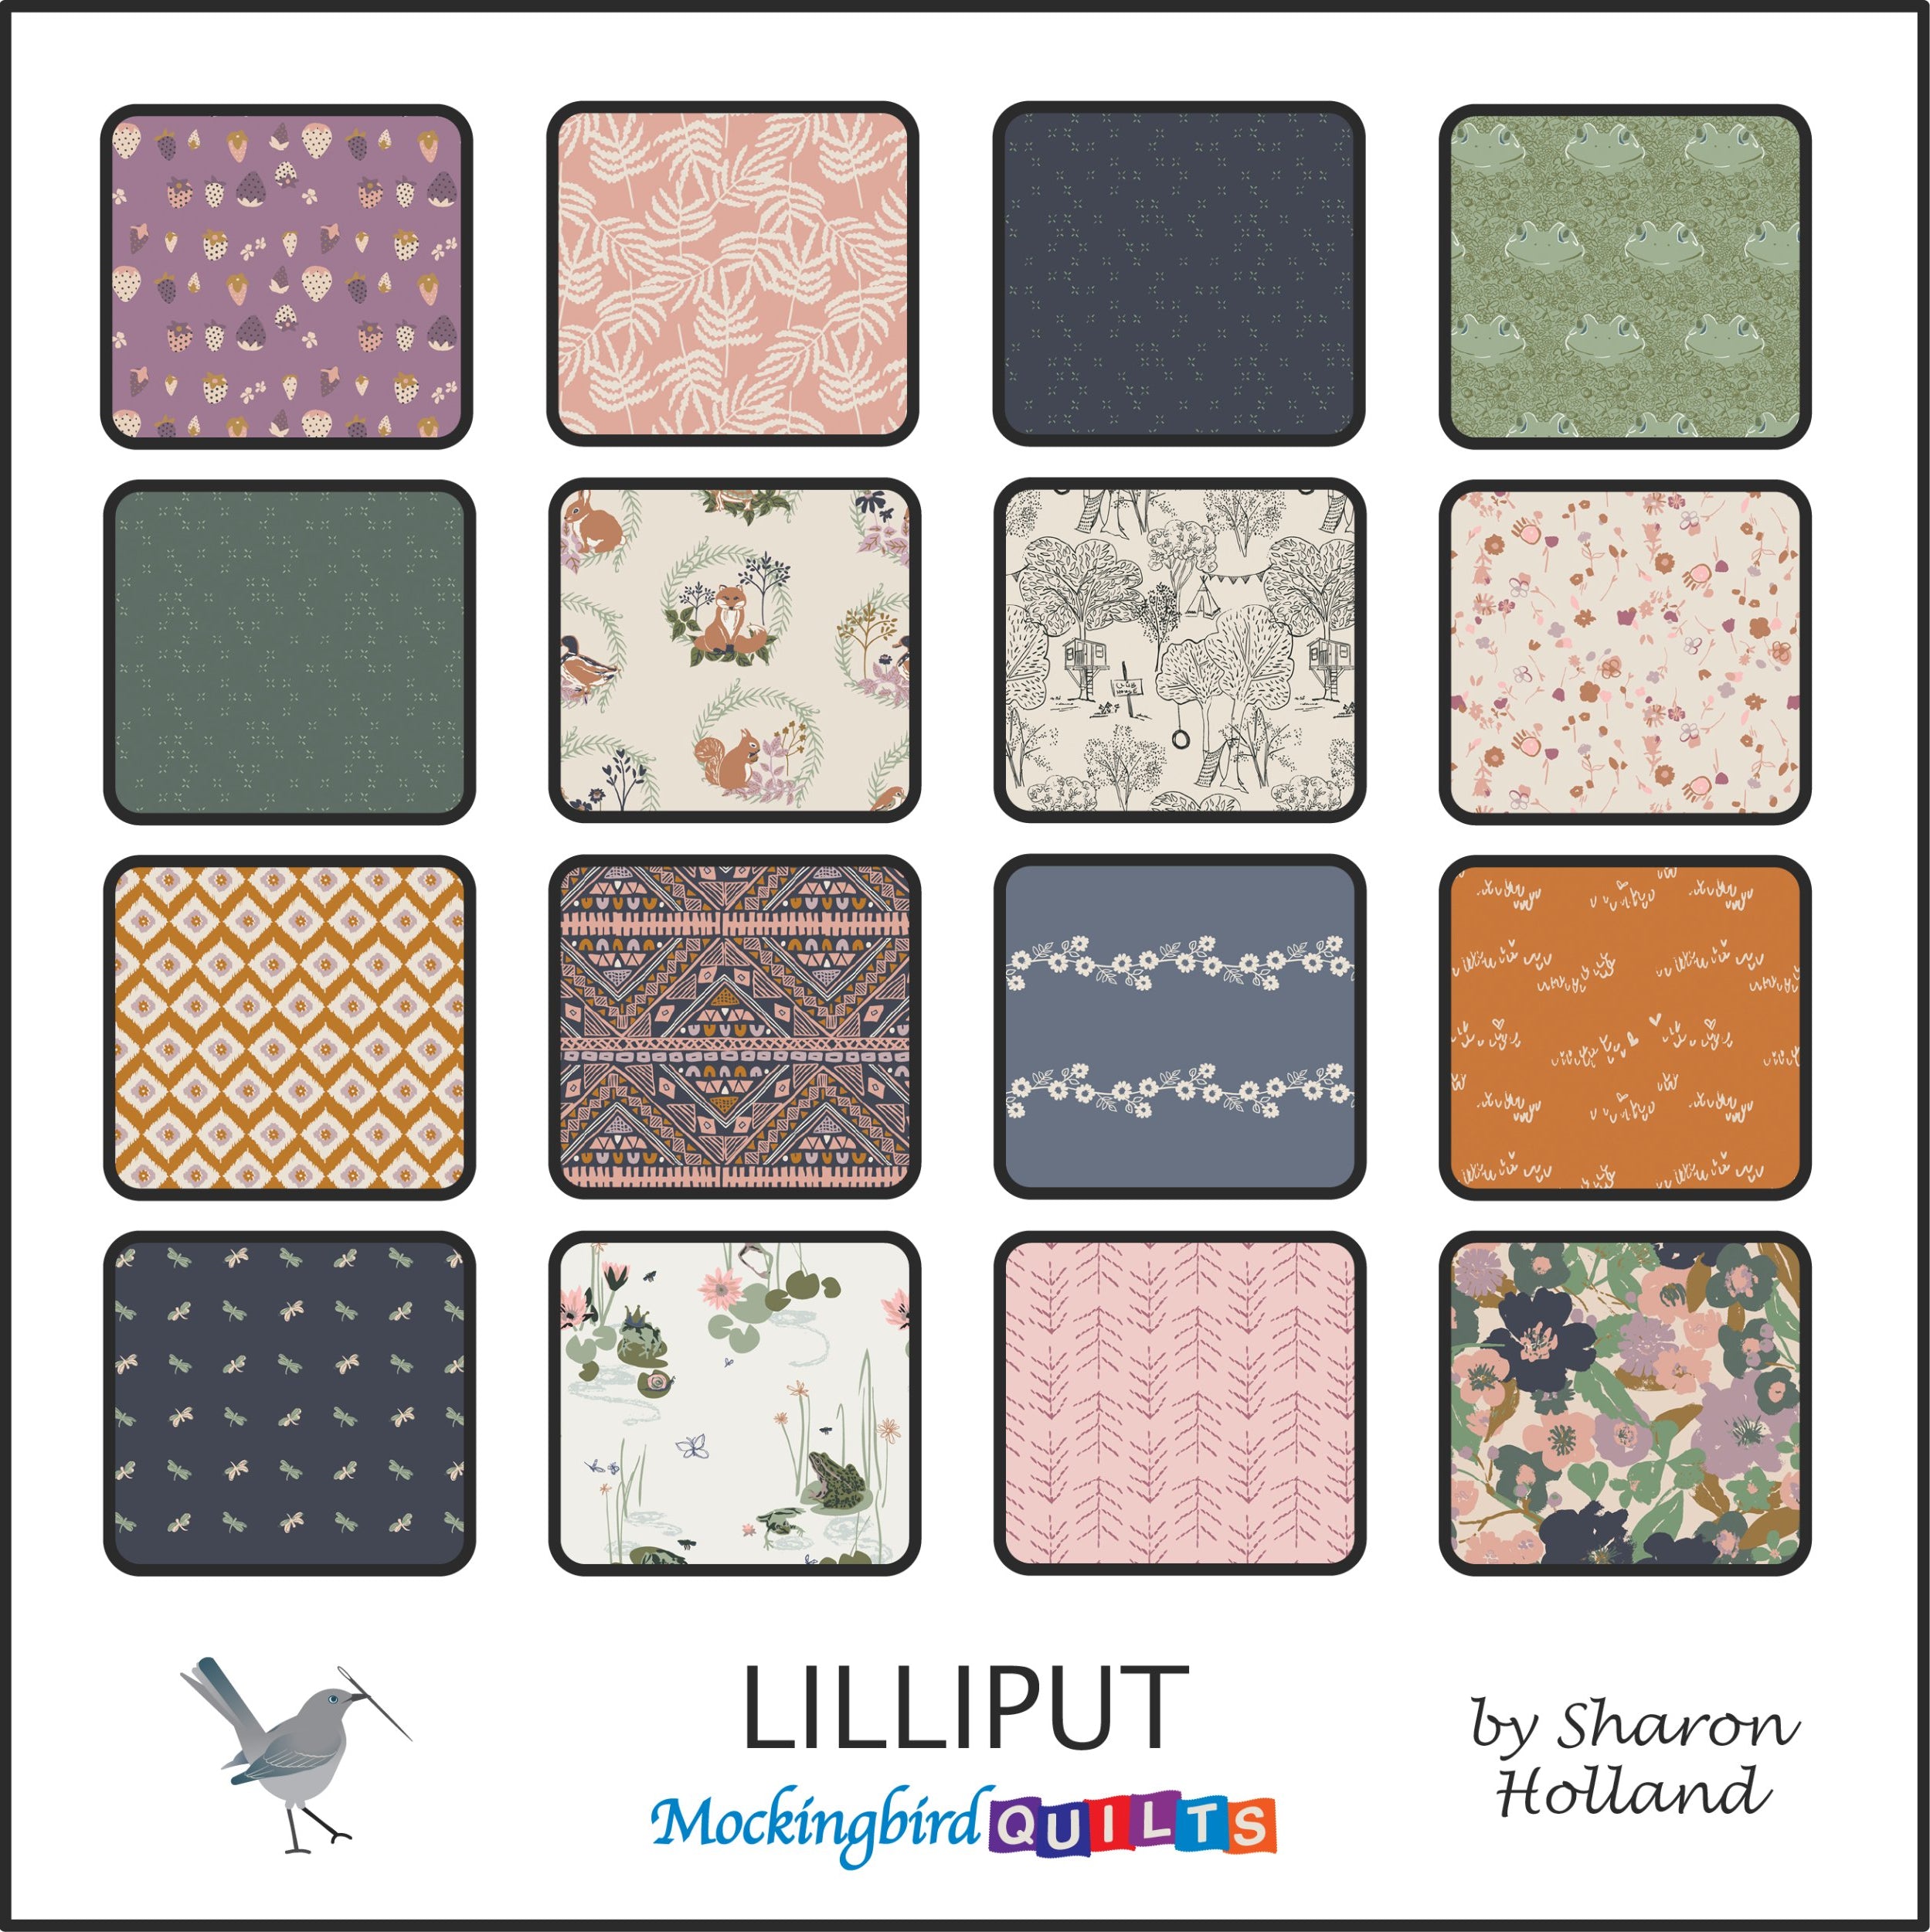 The image shows sixteen fabric swatches for the fabric line “Lilliput” by Sharon Holland. The swatches are in subtle, natural colors like sage, steel gray, and mauve, with nature-inspired patterns like lily pads and florals.